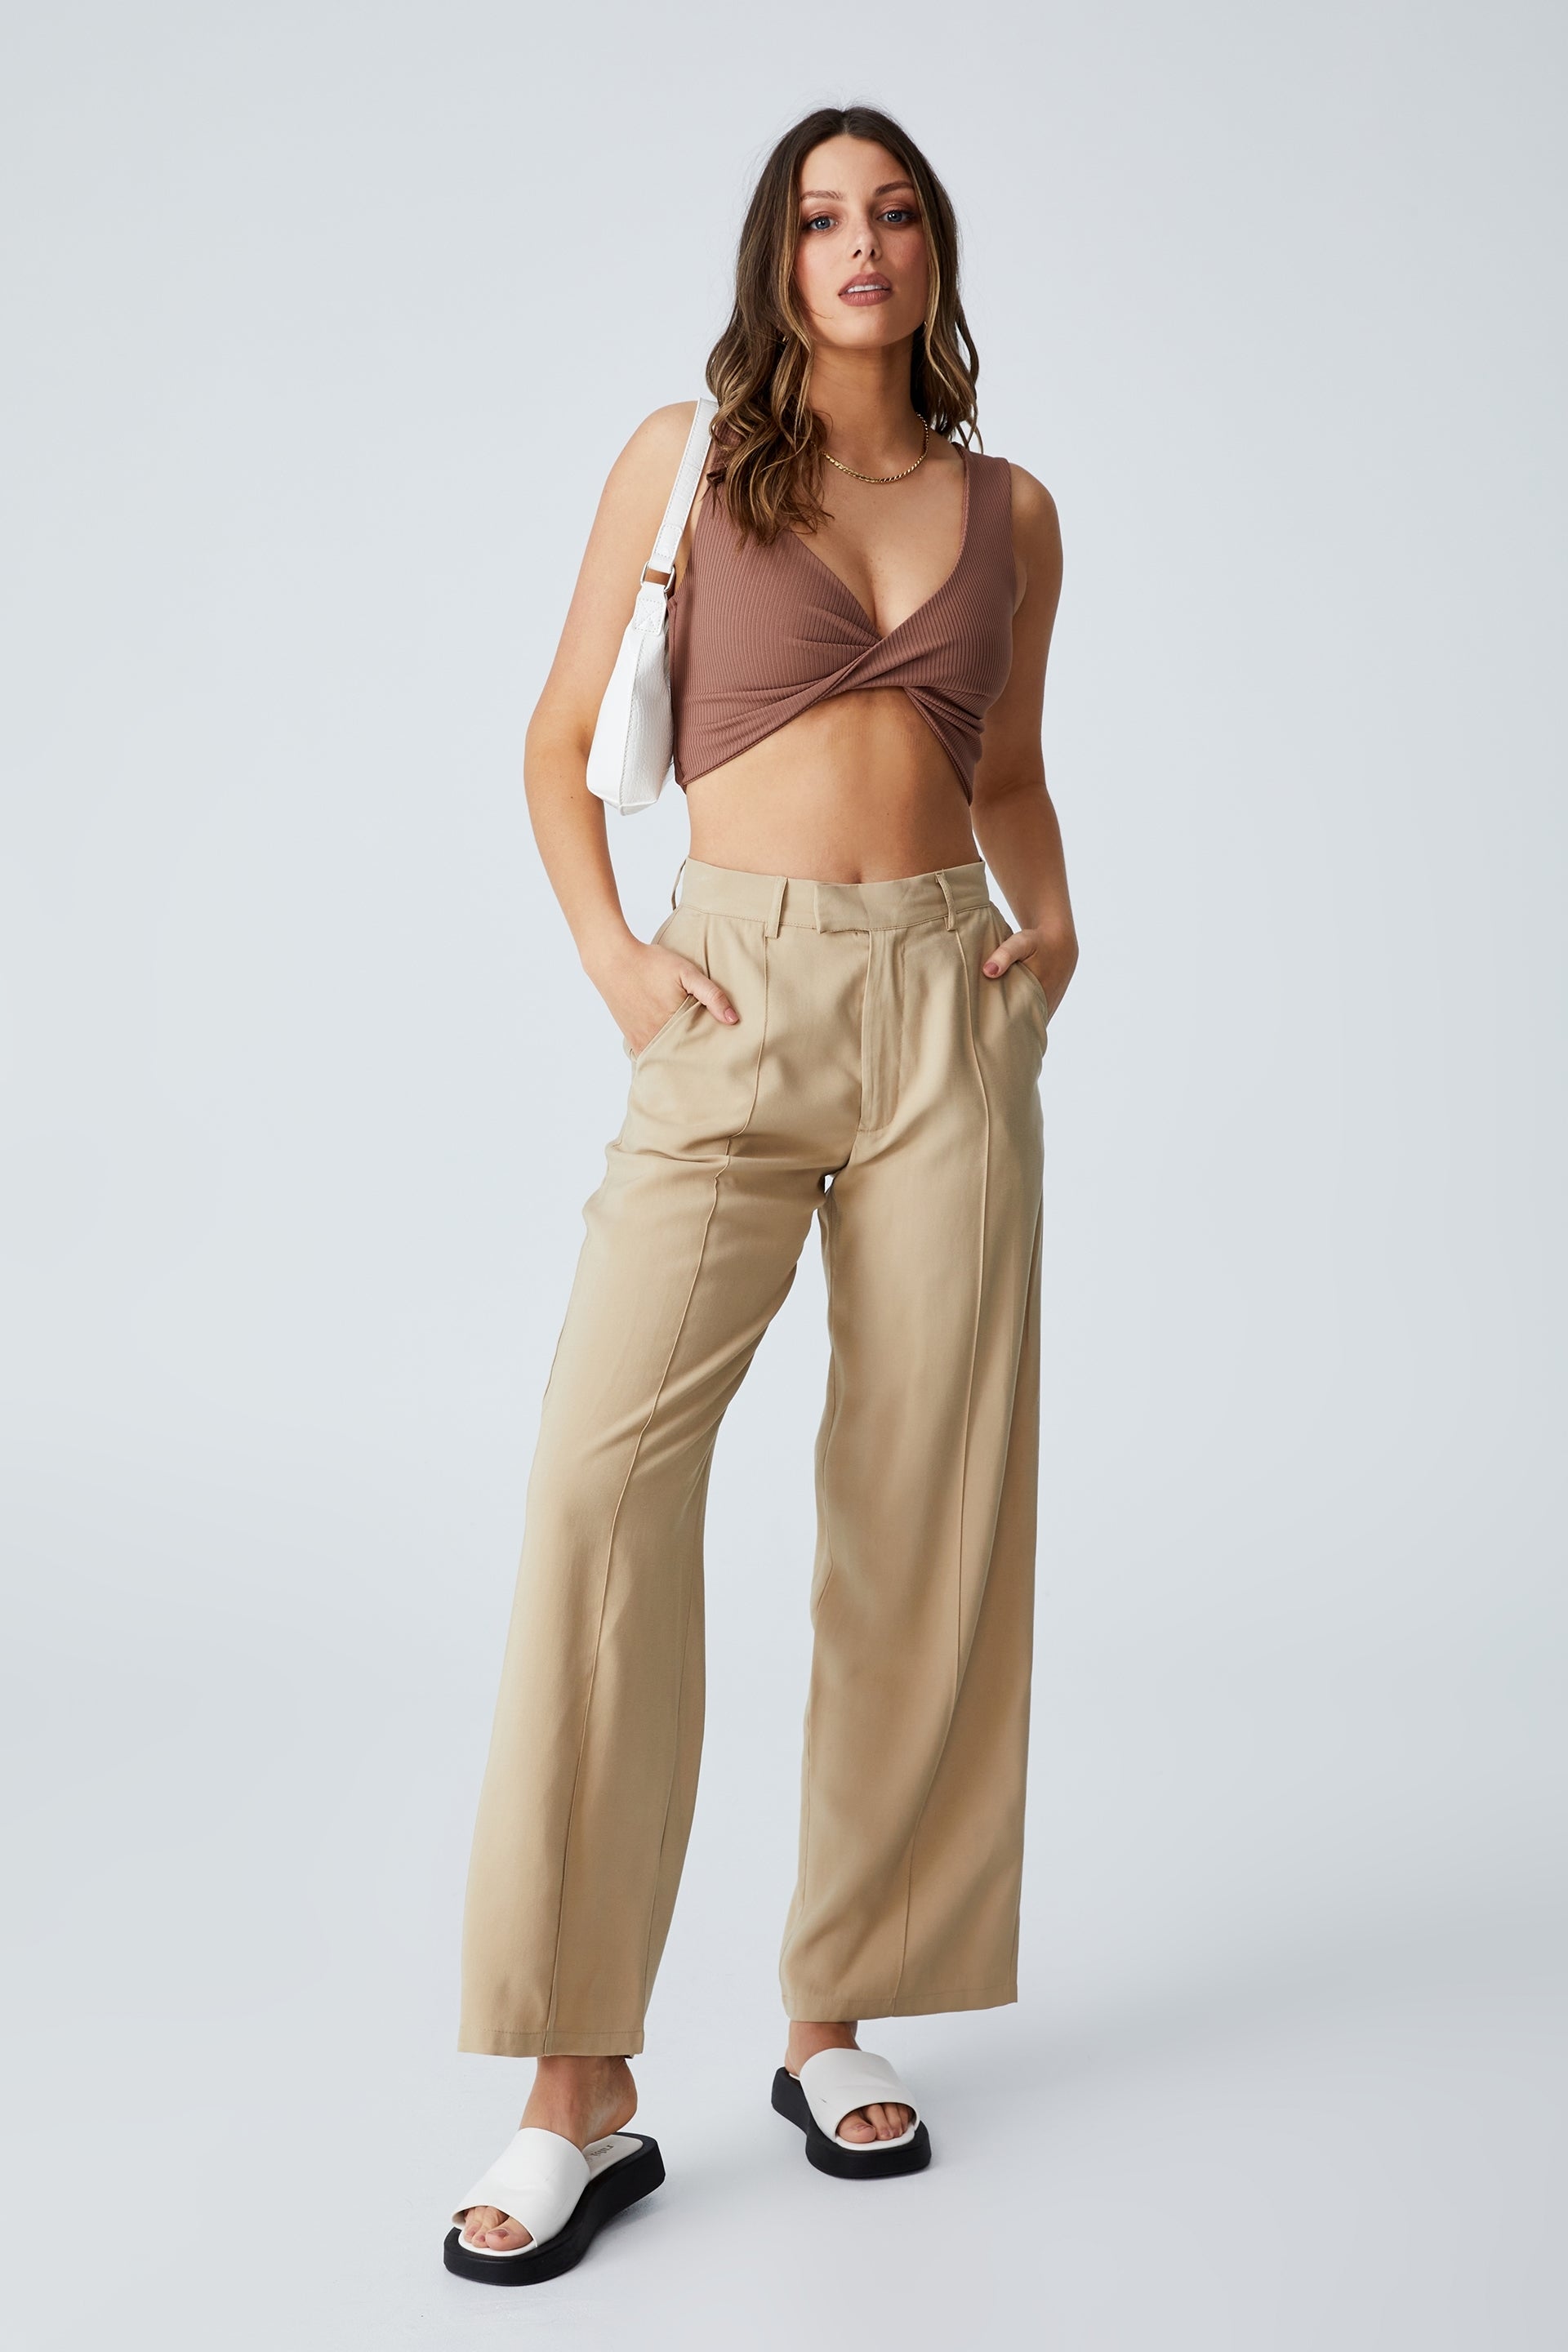 Cotton On - Darcy Soft Tailored Pant